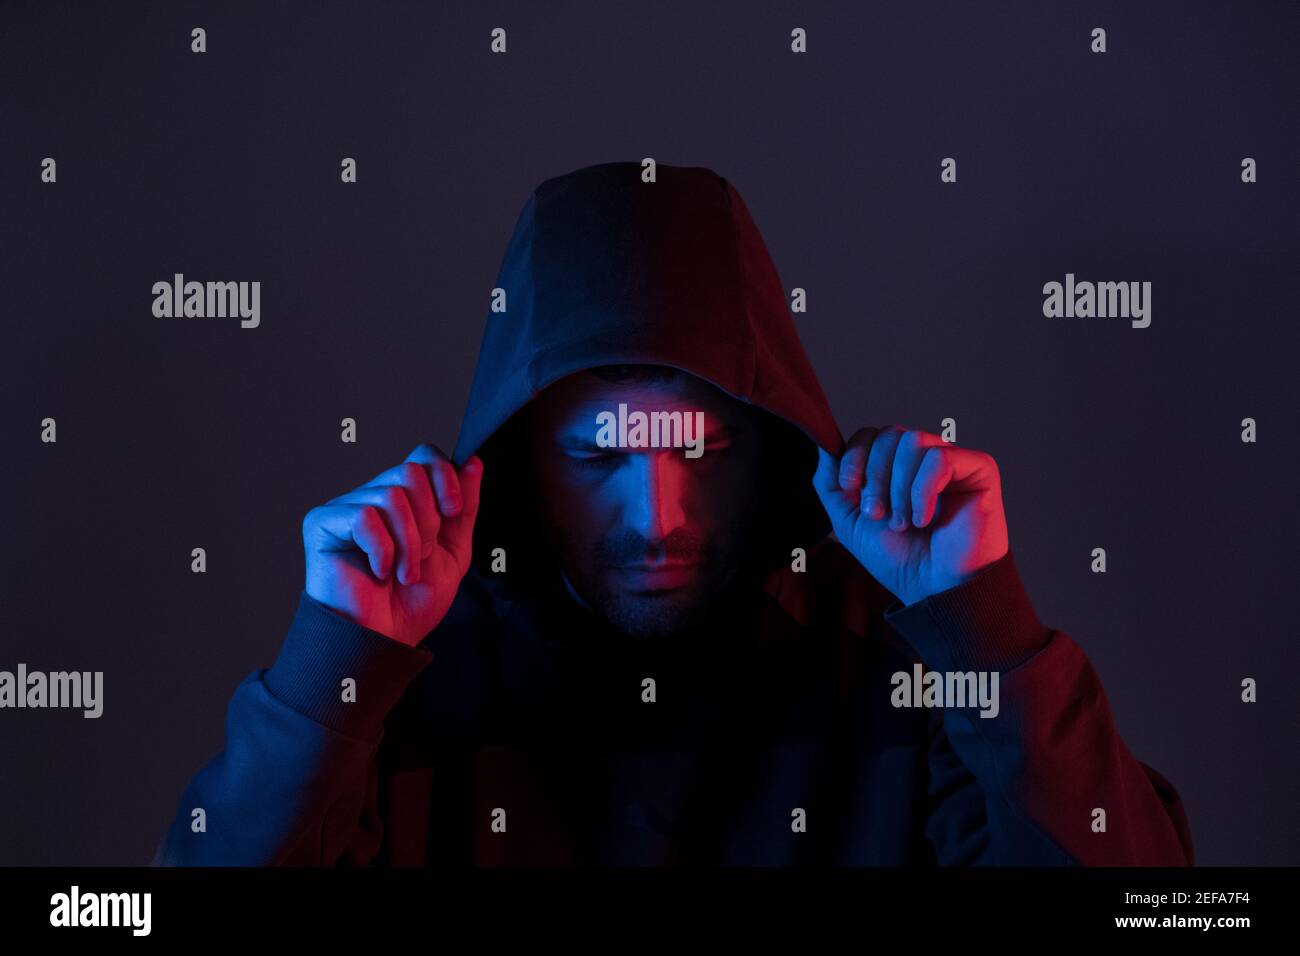 a man illuminated with colored neon lights puts on a hoodie Stock Photo